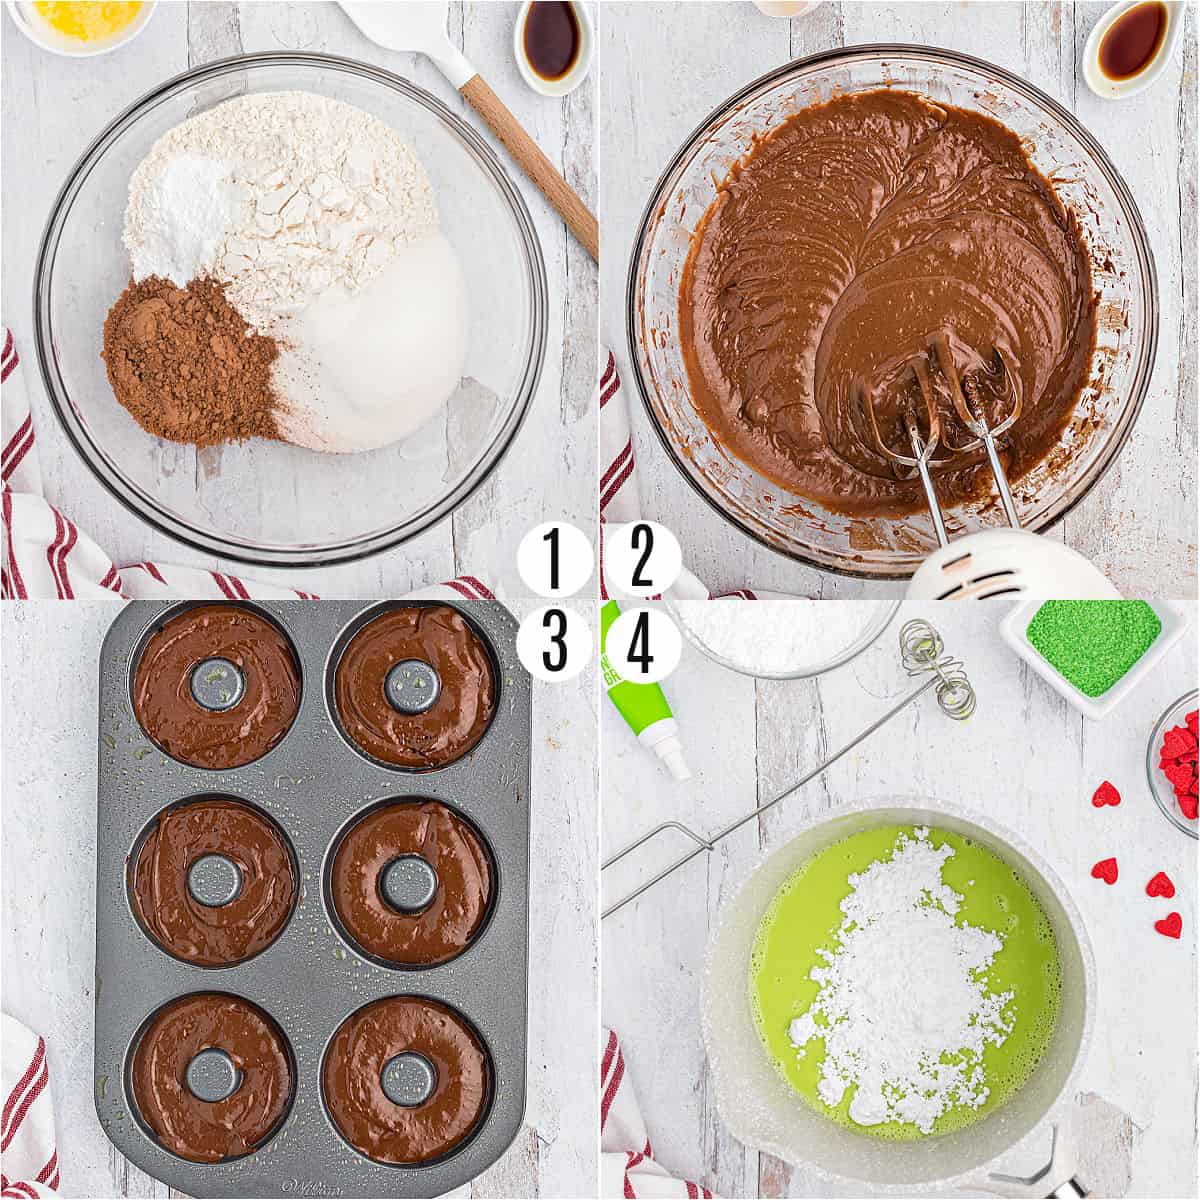 Step by step photos showing how to make grinch donuts.